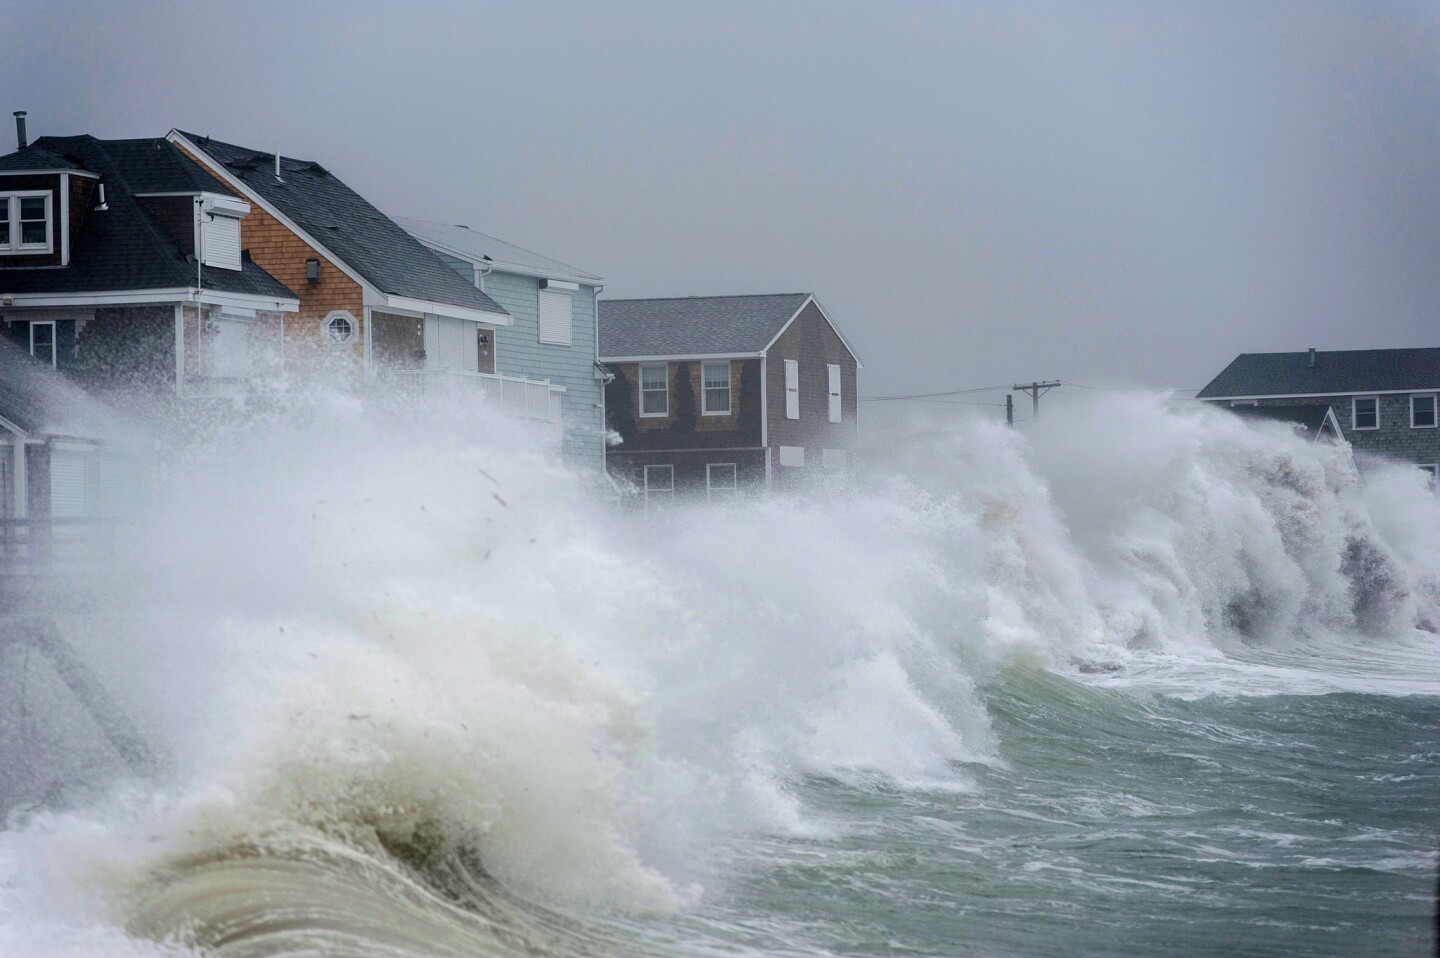 High surf, rain and flooding are taking place in Scituate, Mass., and the surrounding coastal areas of Massachusetts as a storm known as a "bomb cyclone" makes its way past the East Coast.